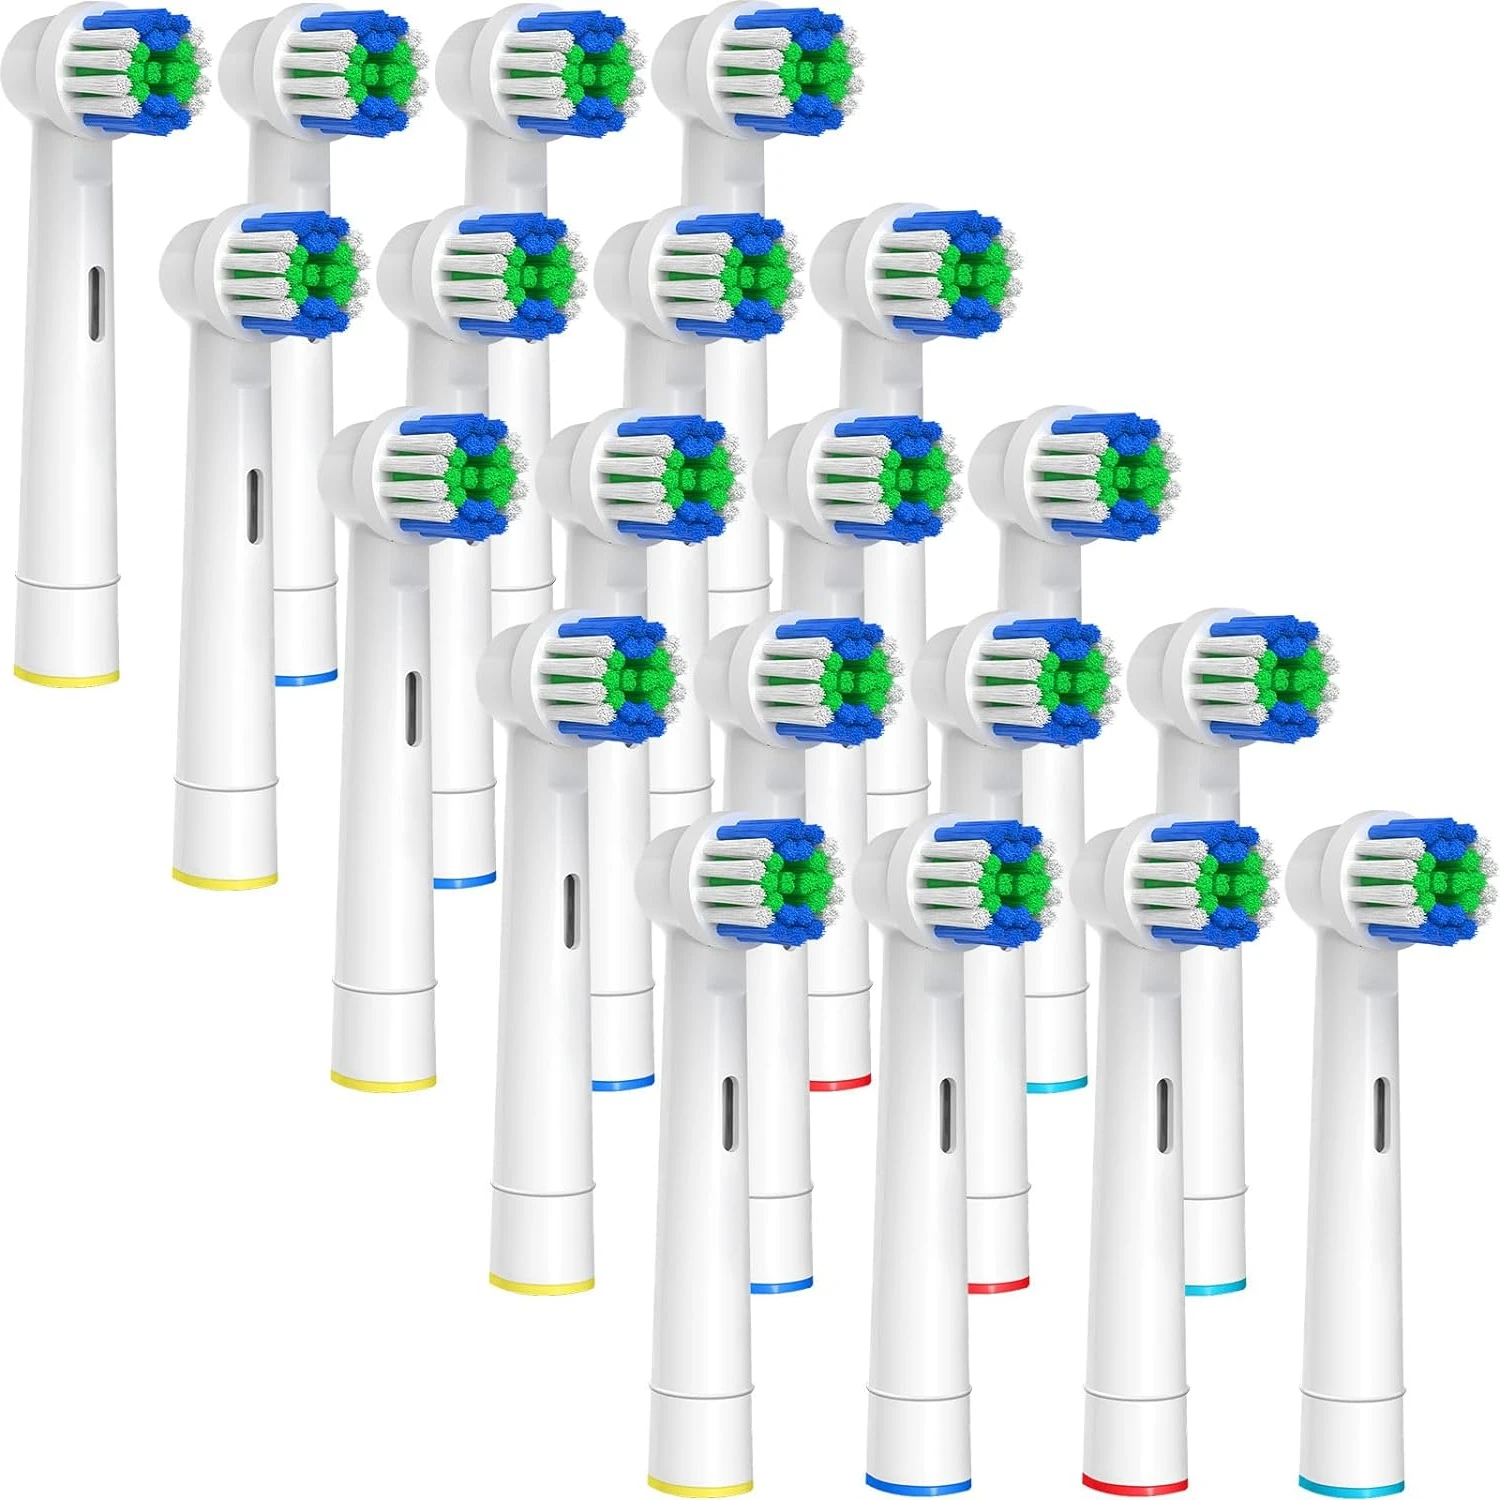 

20/16/14/8/4 Pcs Replacement Toothbrush Heads Compatible with Oral B Professional Electric Toothbrush